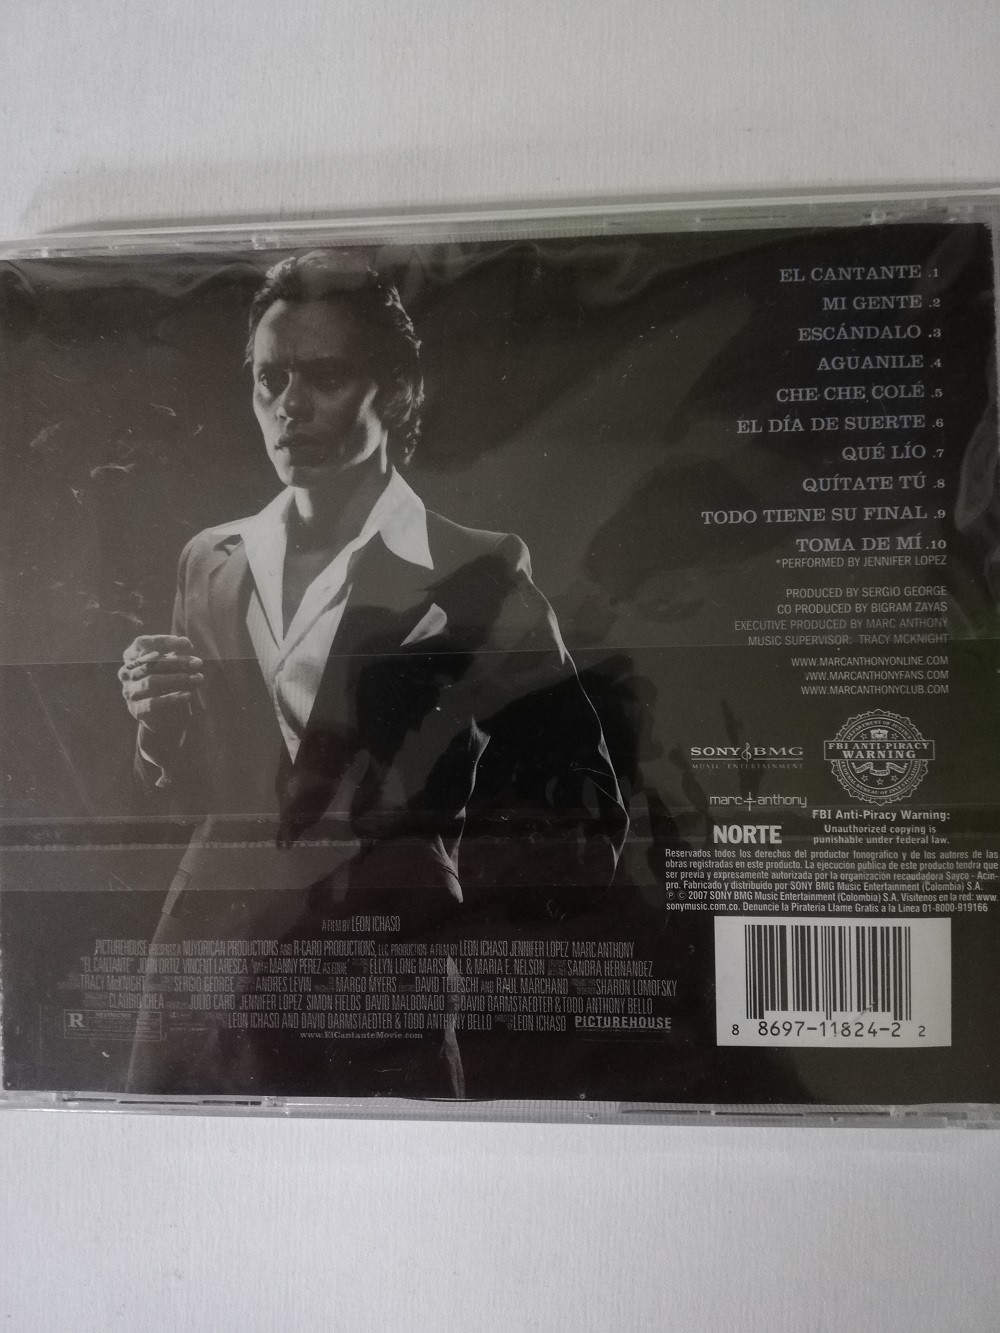 Imagen CD MARC ANTHONY - EL CANTANTE, MUSIC FROM AND INSPIRATED BY THE ORIGINAL MOTION PICTURE 2